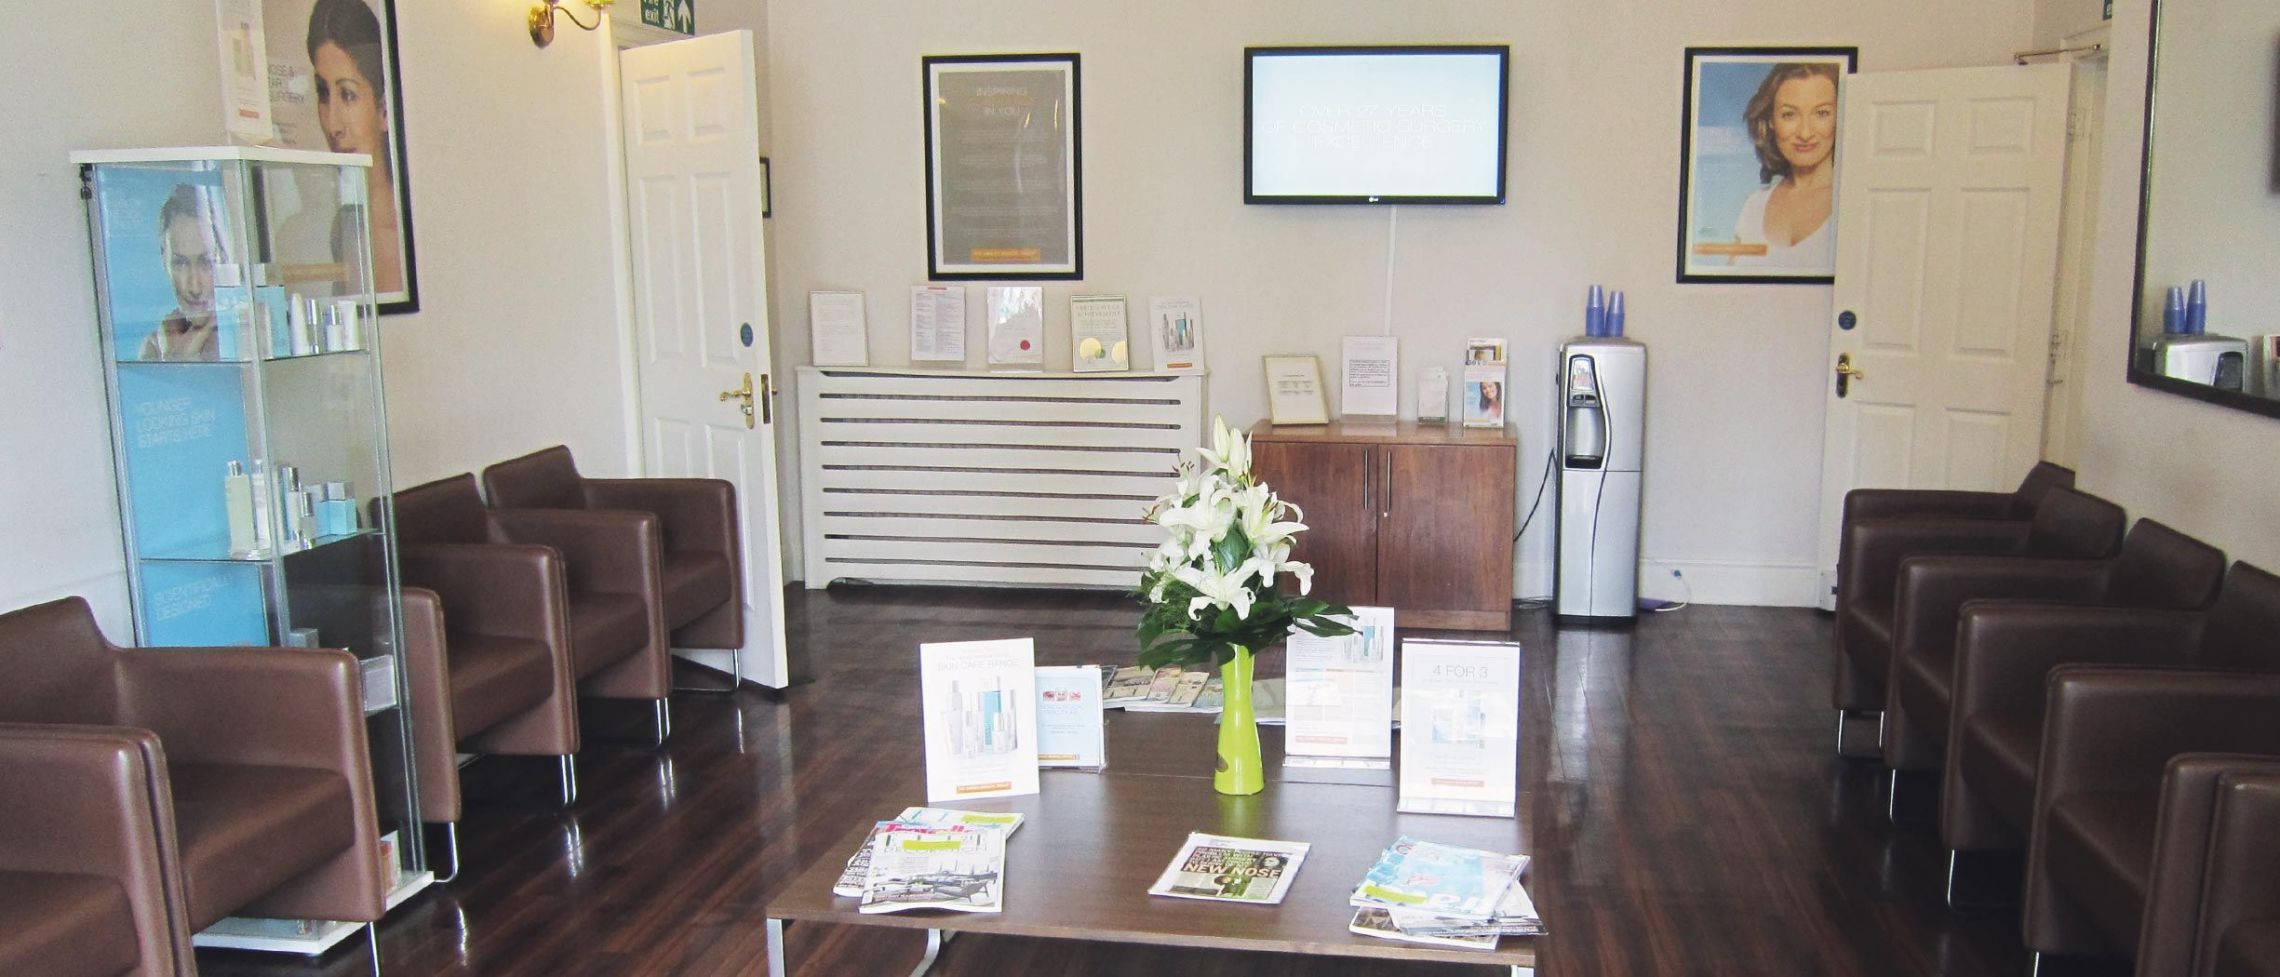 The Harley Medical Group London - Chiswick